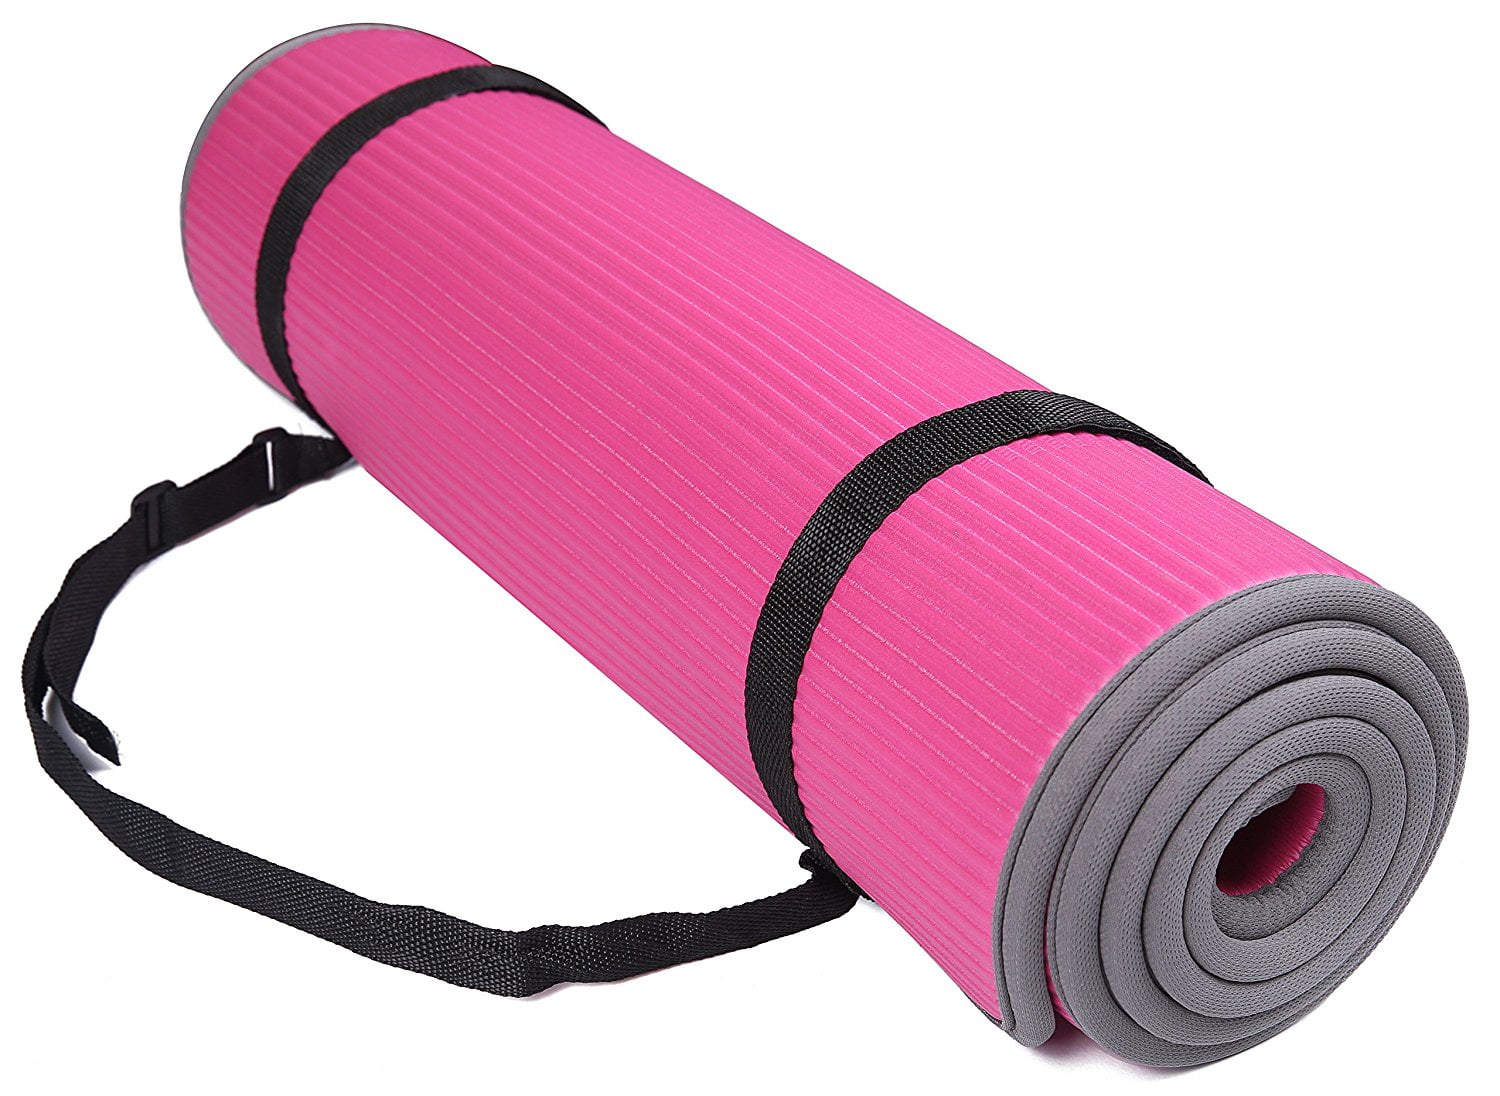 10mm Extra Thick High Density Anti-Slip Exercise Pilates Yoga Mat with Carrying Strap BalanceFrom GoFit All-Purpose 2/5-Inch 